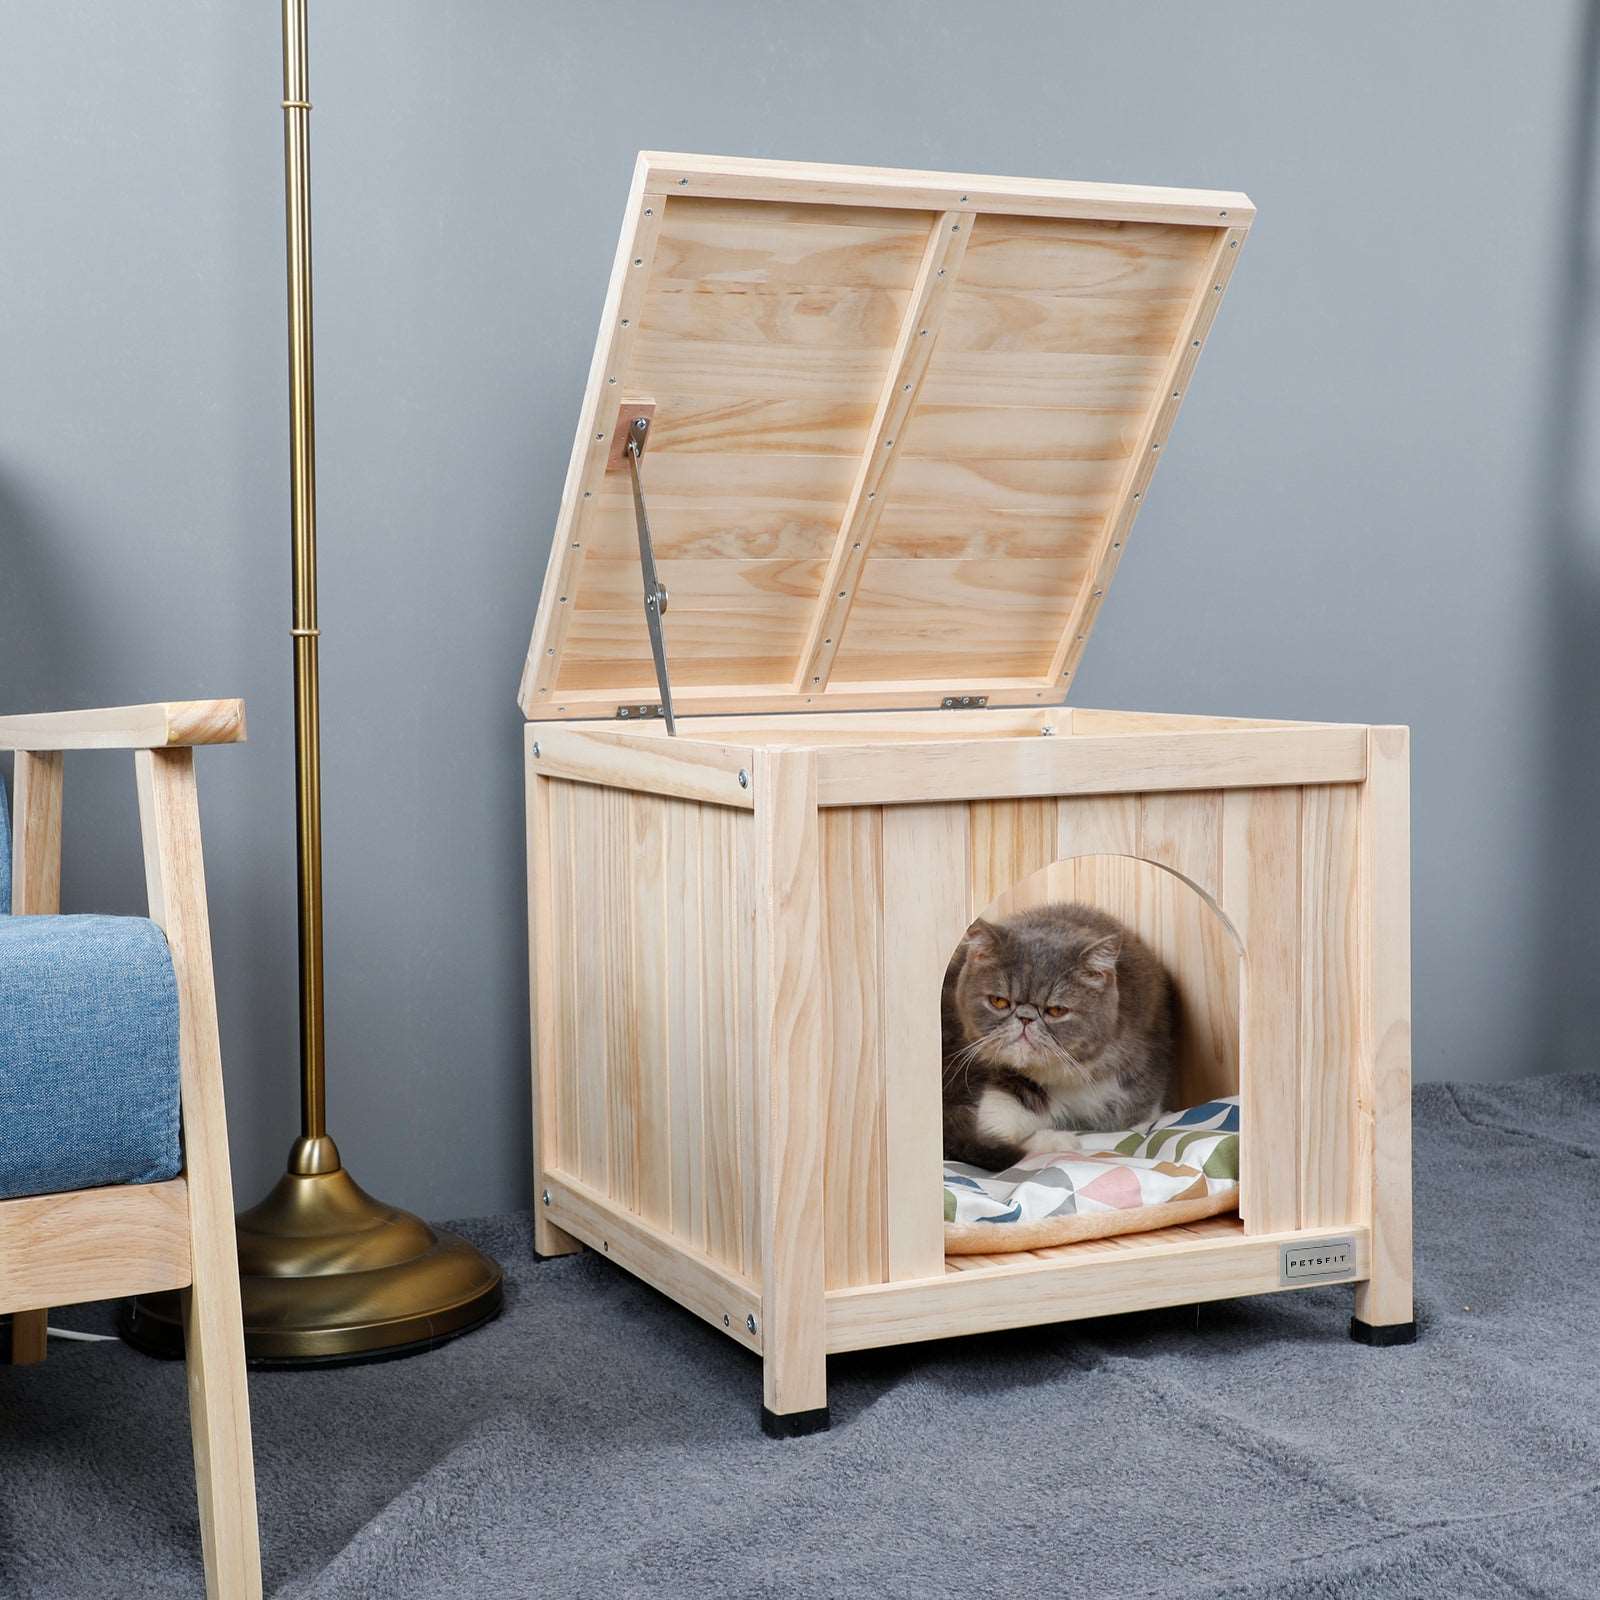 Petsfit-Indoor-Dog-House-Wood-with-Elevated-and-Ventilate-Floor-07